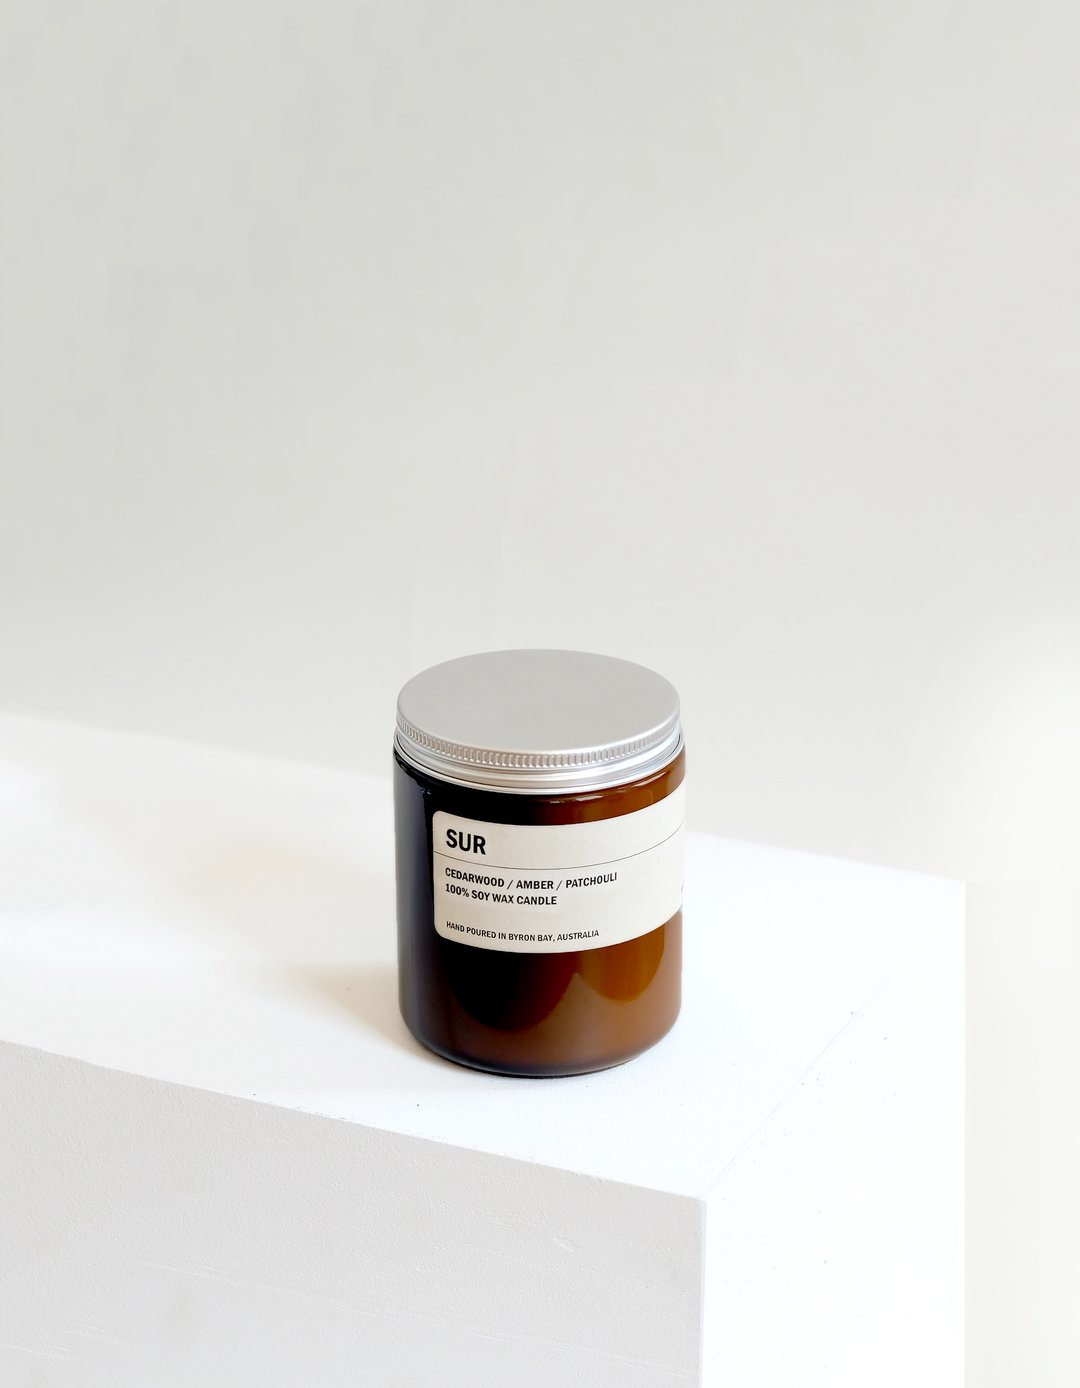 SUR: CEDARWOOD / AMBER / PATCHOULI SMALL AMBER CANDLE 250G